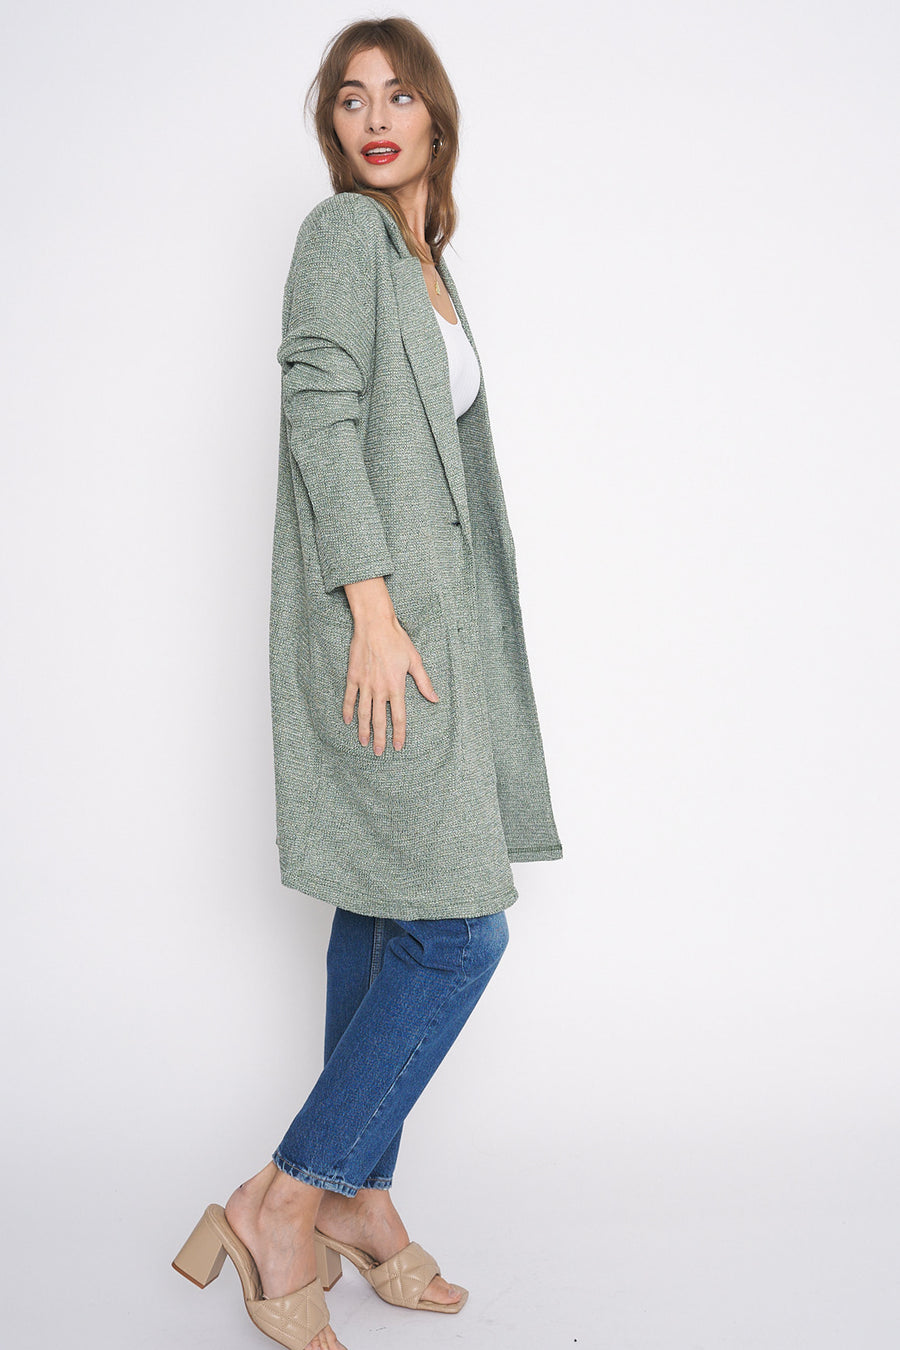 No Srcipt image - Images of 5 of 5 DRIED ROSEMARY KNIT DUSTER JACKET LONG SLEEVE SPRING JACKET